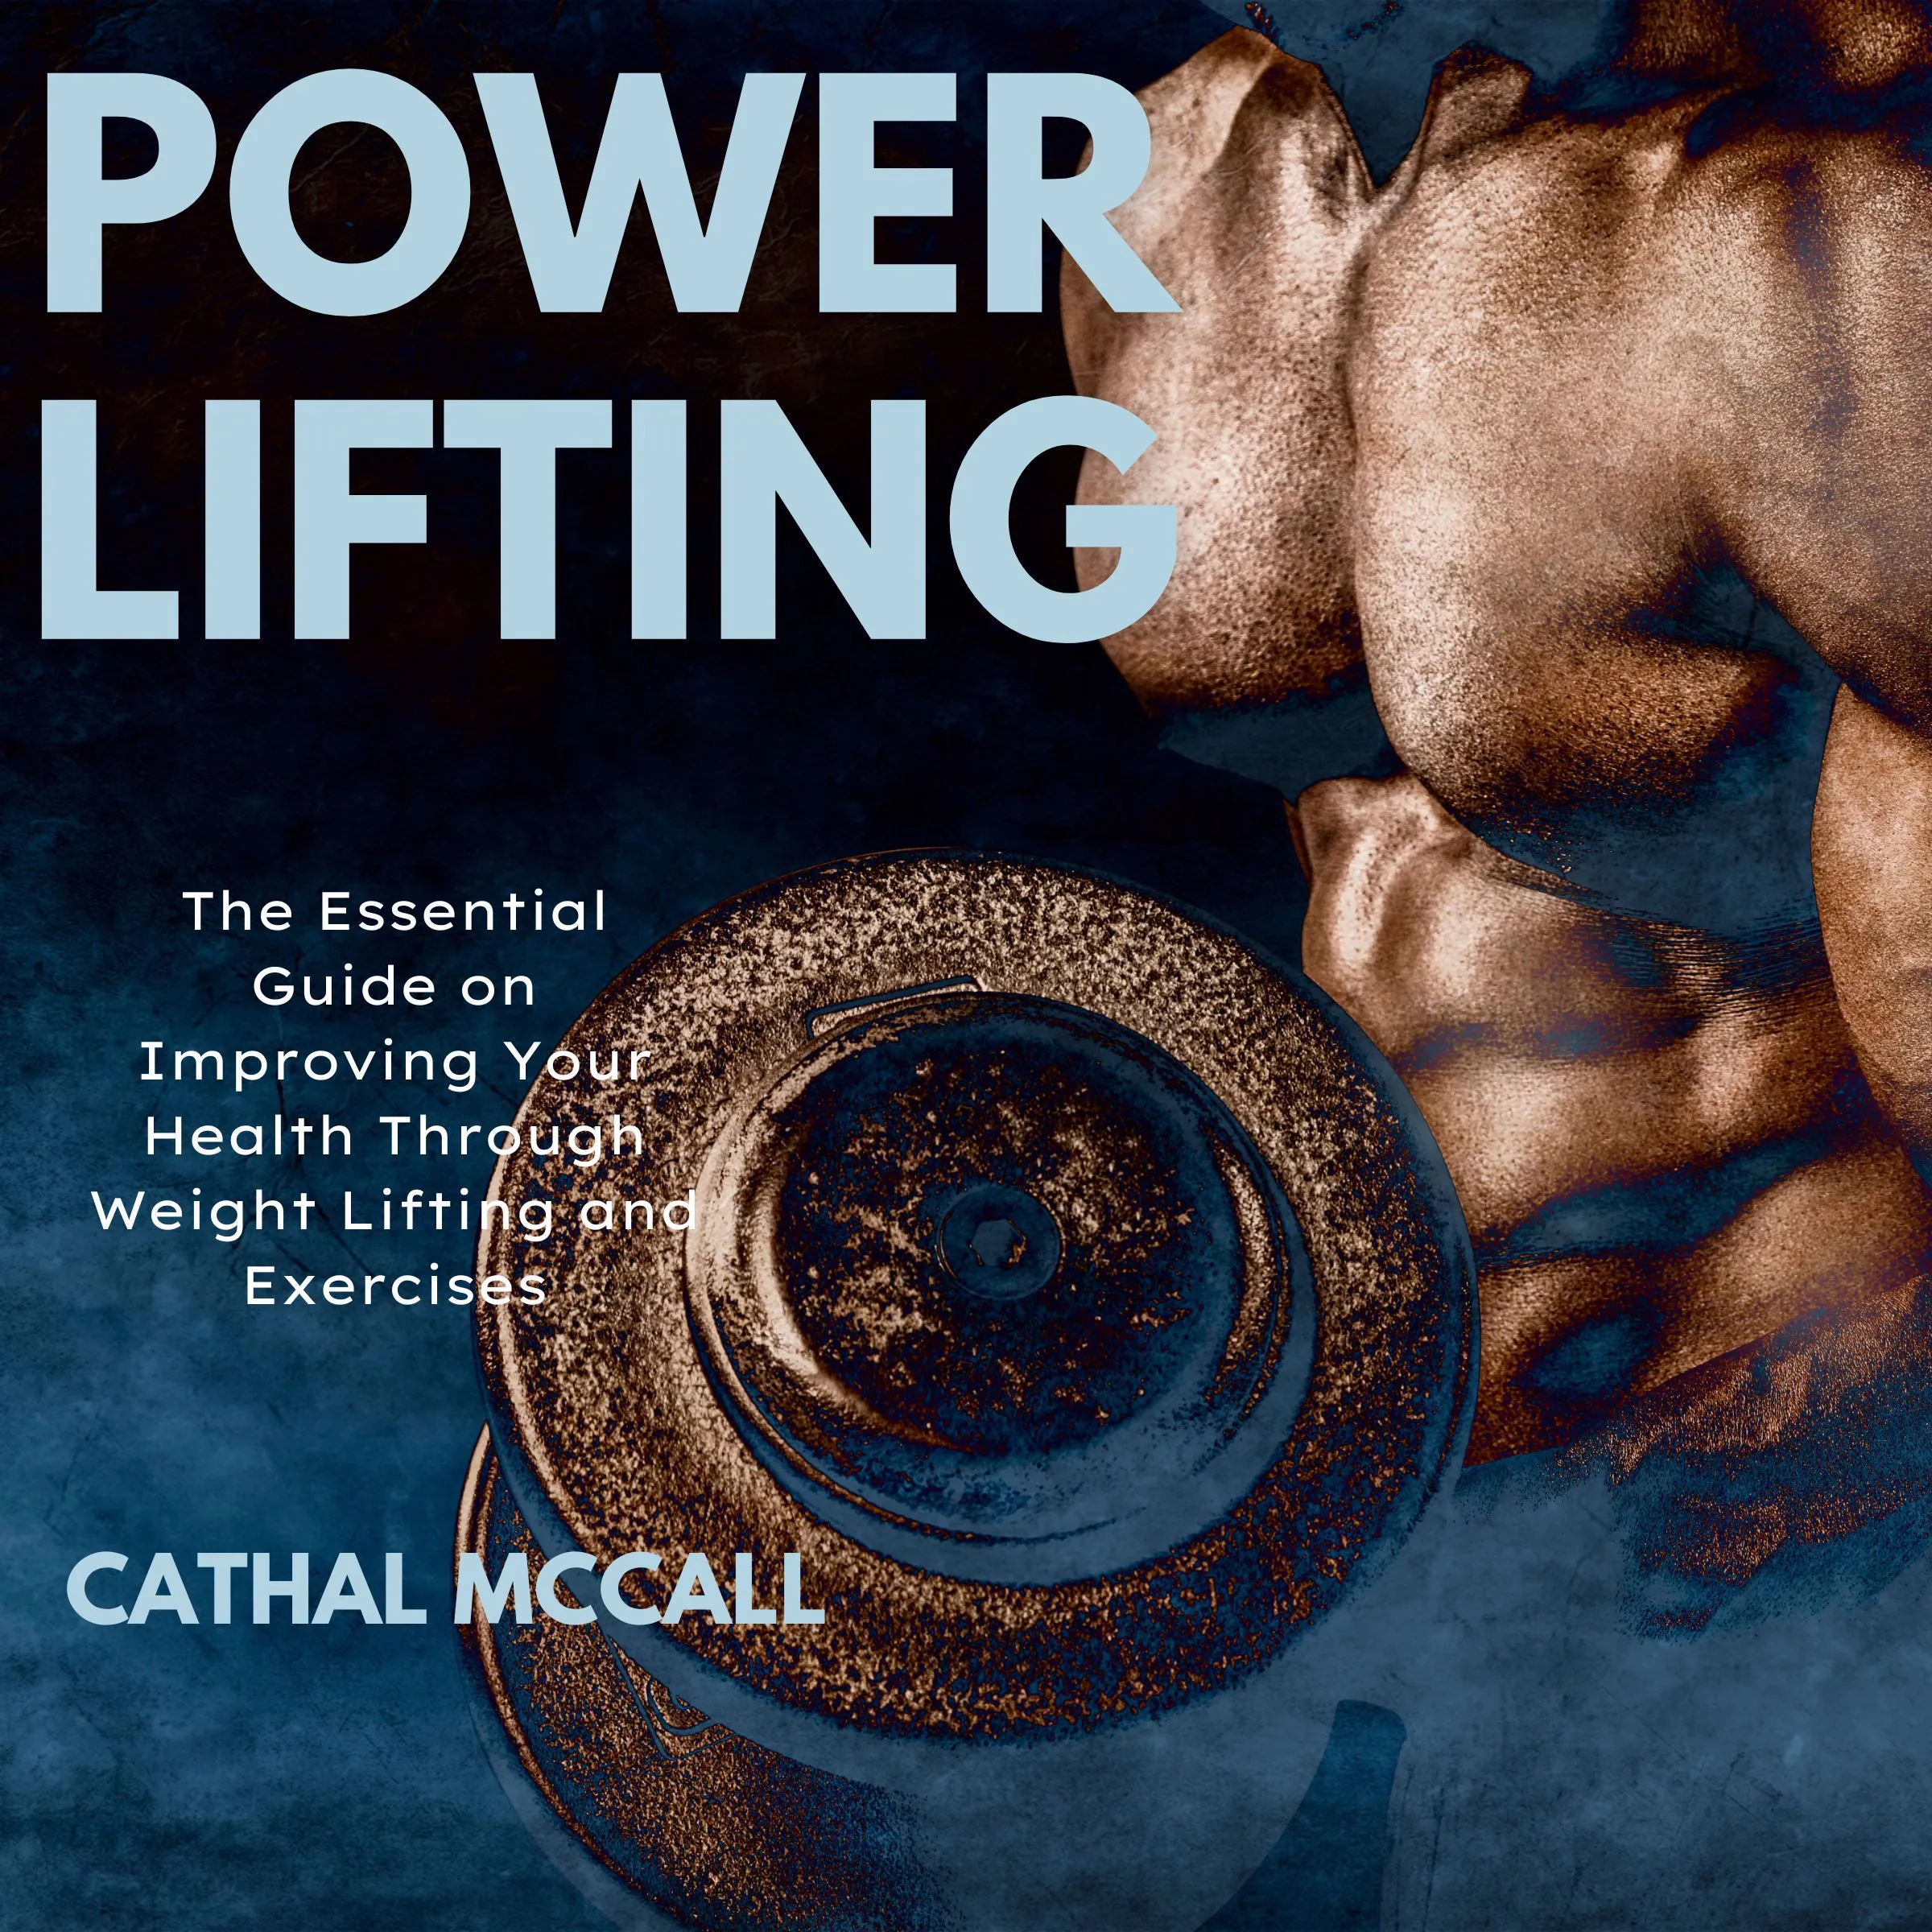 Power Lifting by Cathal Mccall Audiobook